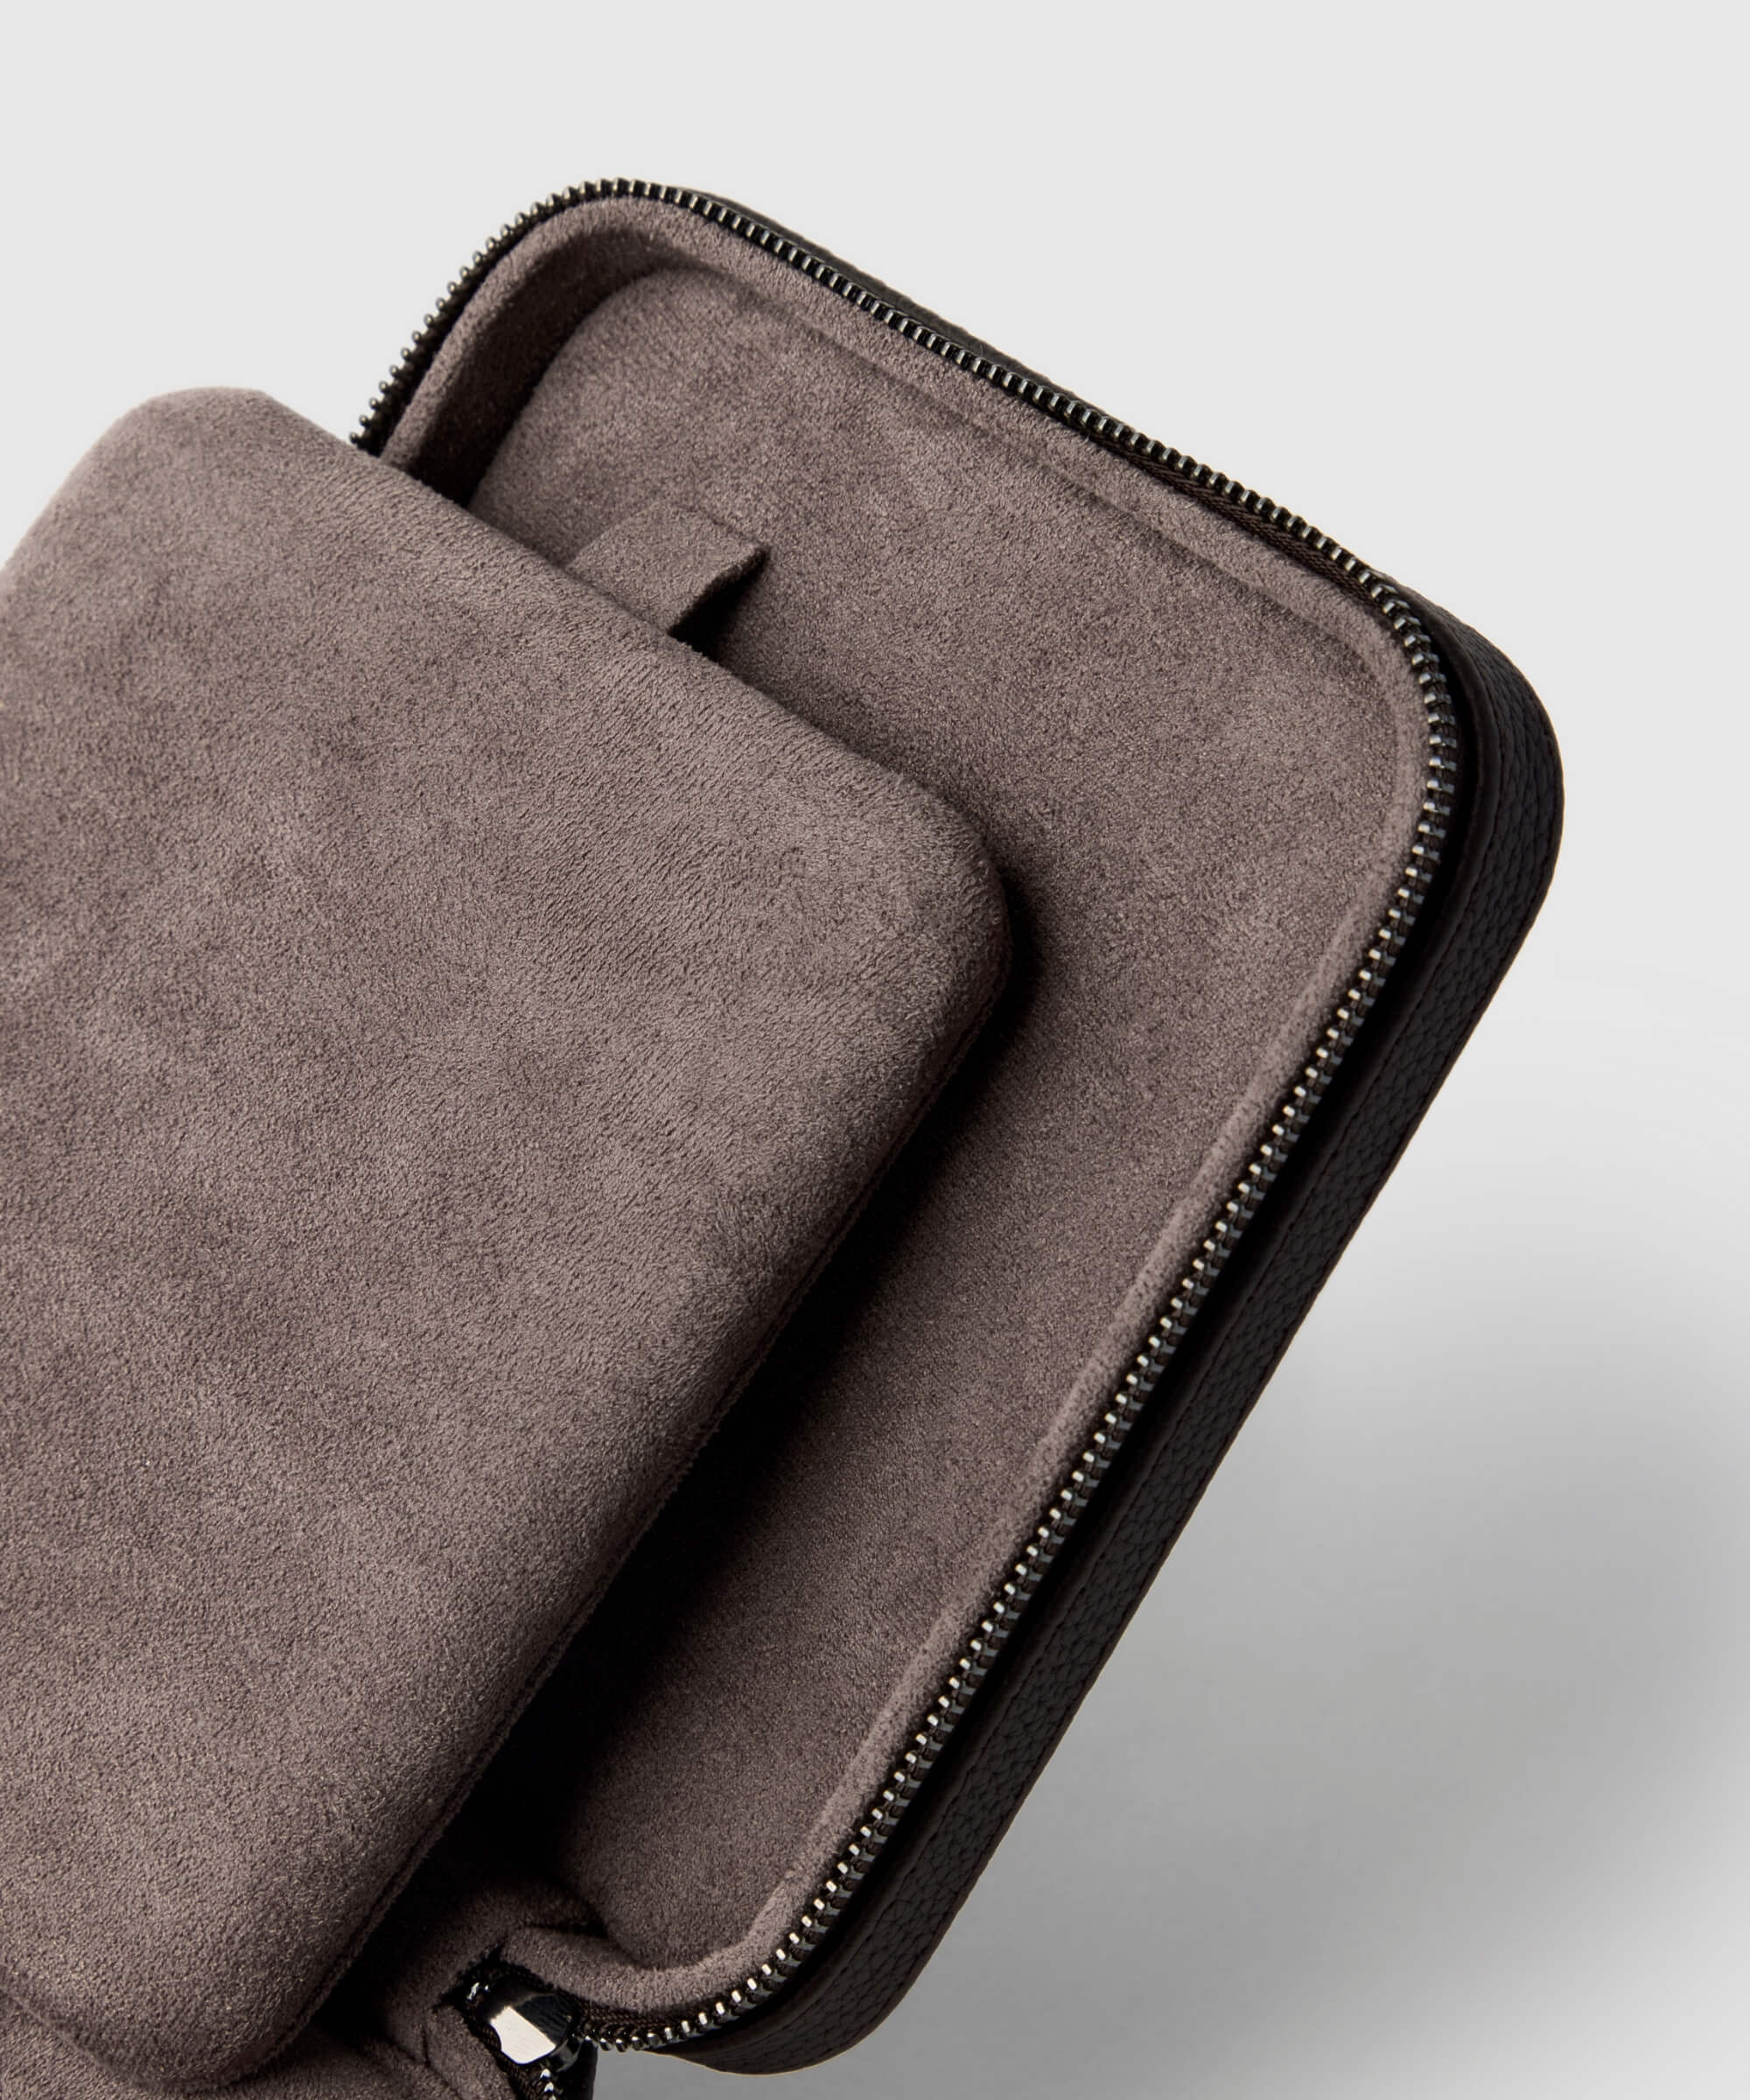 An open zippered suede pouch from the TAWBURY range reveals a soft interior pocket with a small tab, reminiscent of the craftsmanship found in a Fraser 4 Watch Travel Case - Brown (Coming Soon).